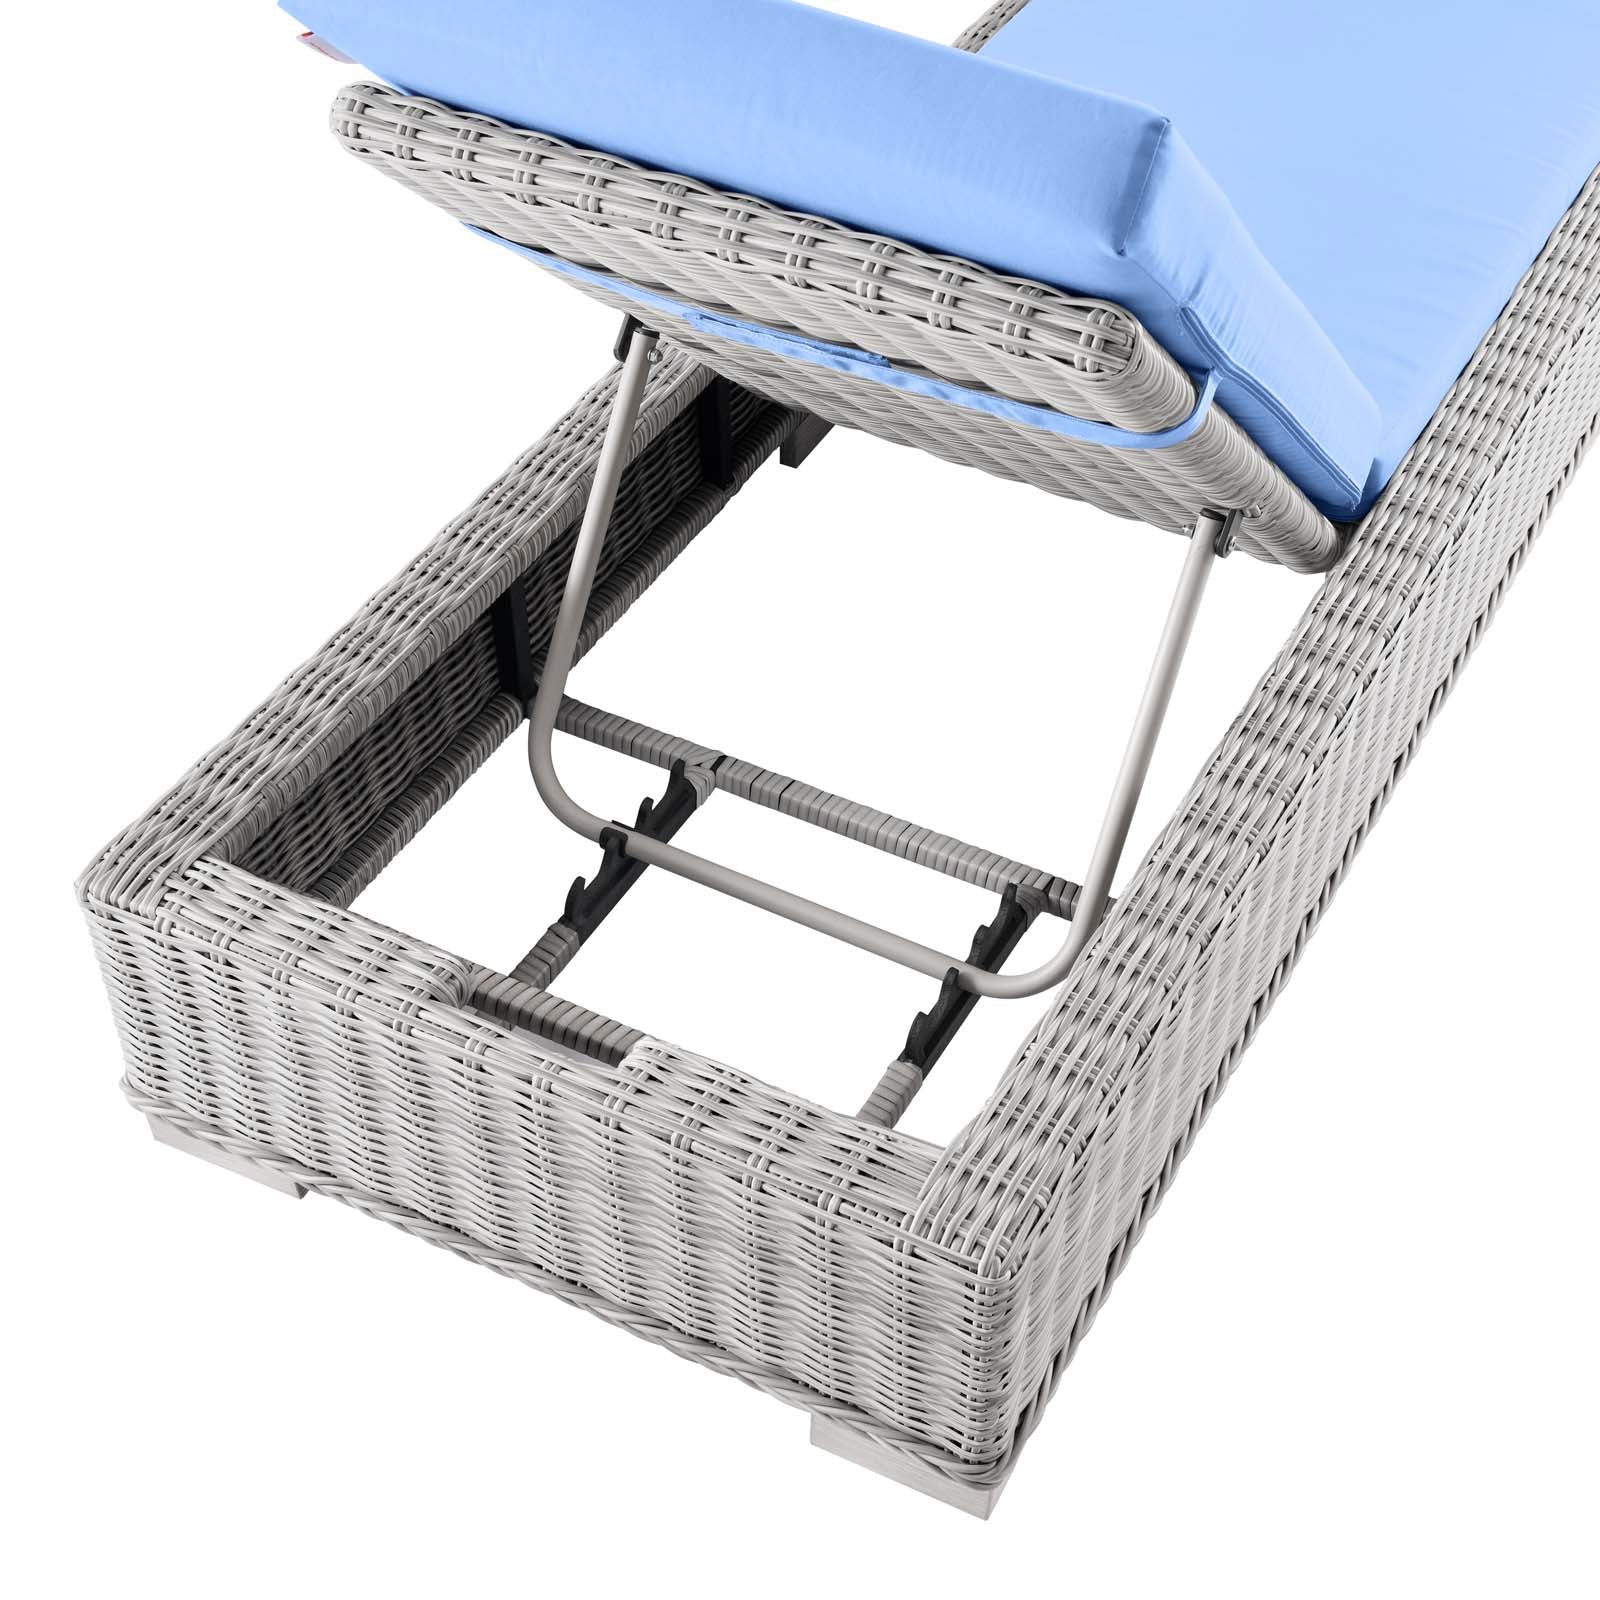 Modway Outdoor Loungers - Conway Outdoor Patio Wicker Rattan Chaise Lounge Light Gray Light Blue